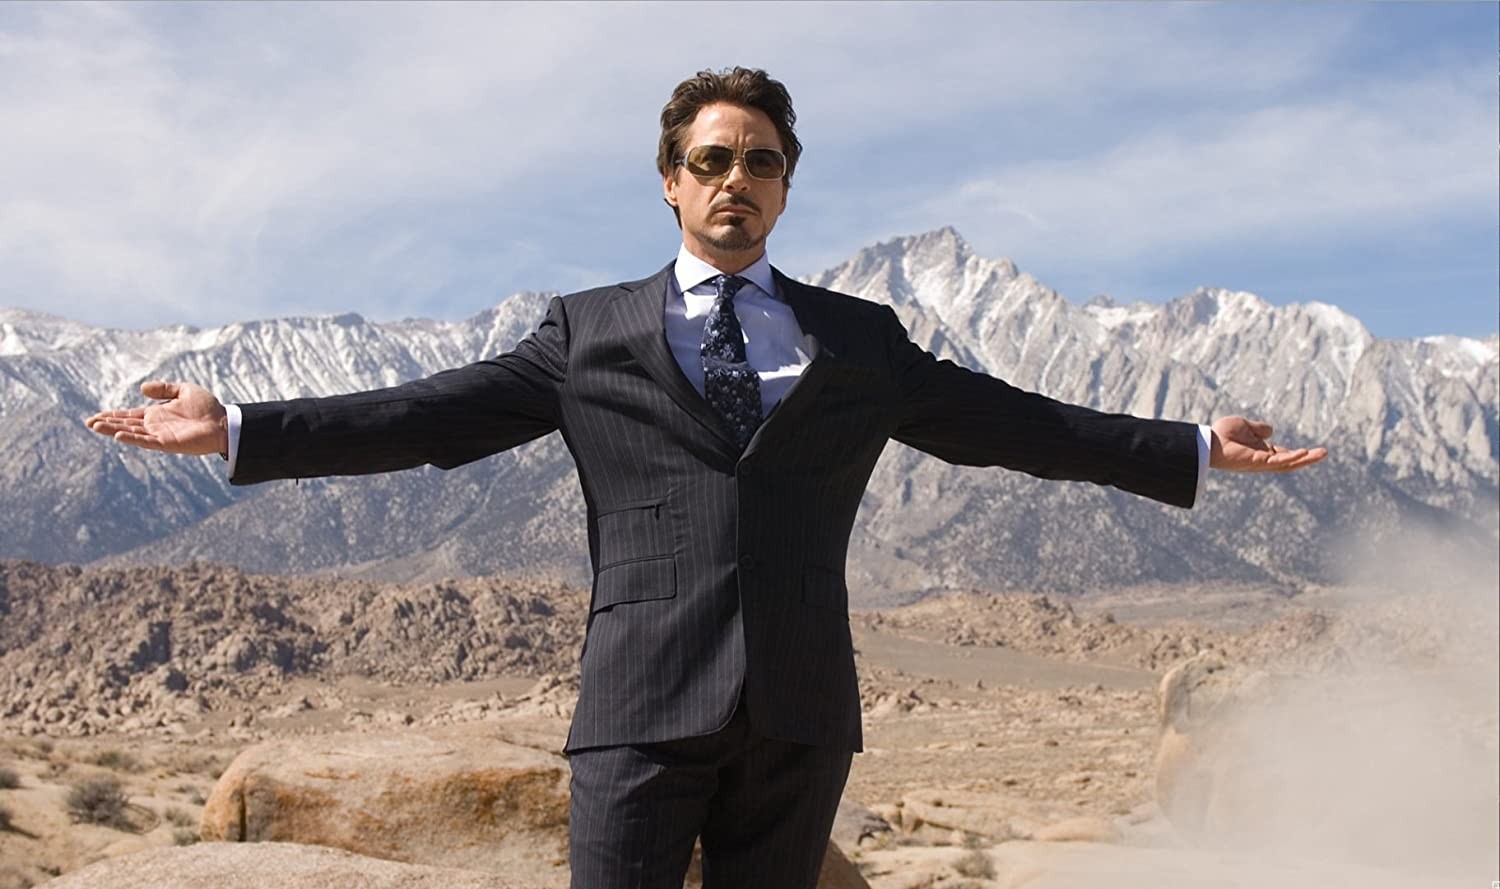 Robert Downey Jr. in and as Iron Man (2008).